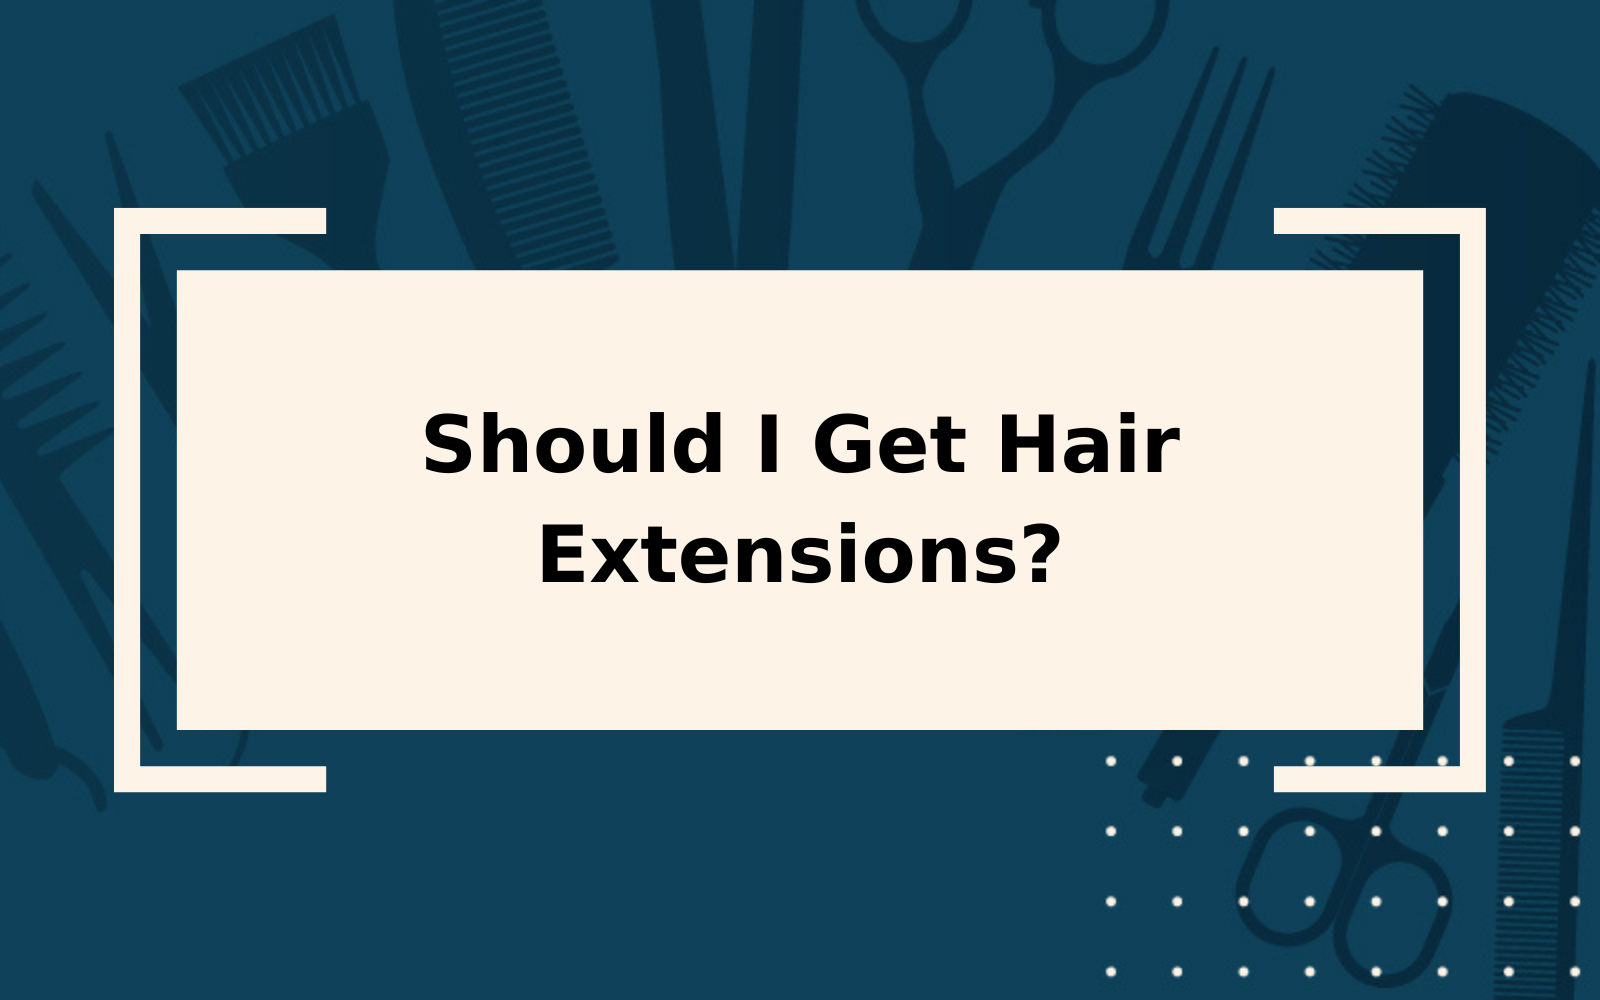 Should I Get Hair Extensions? | It Depends… Learn Why